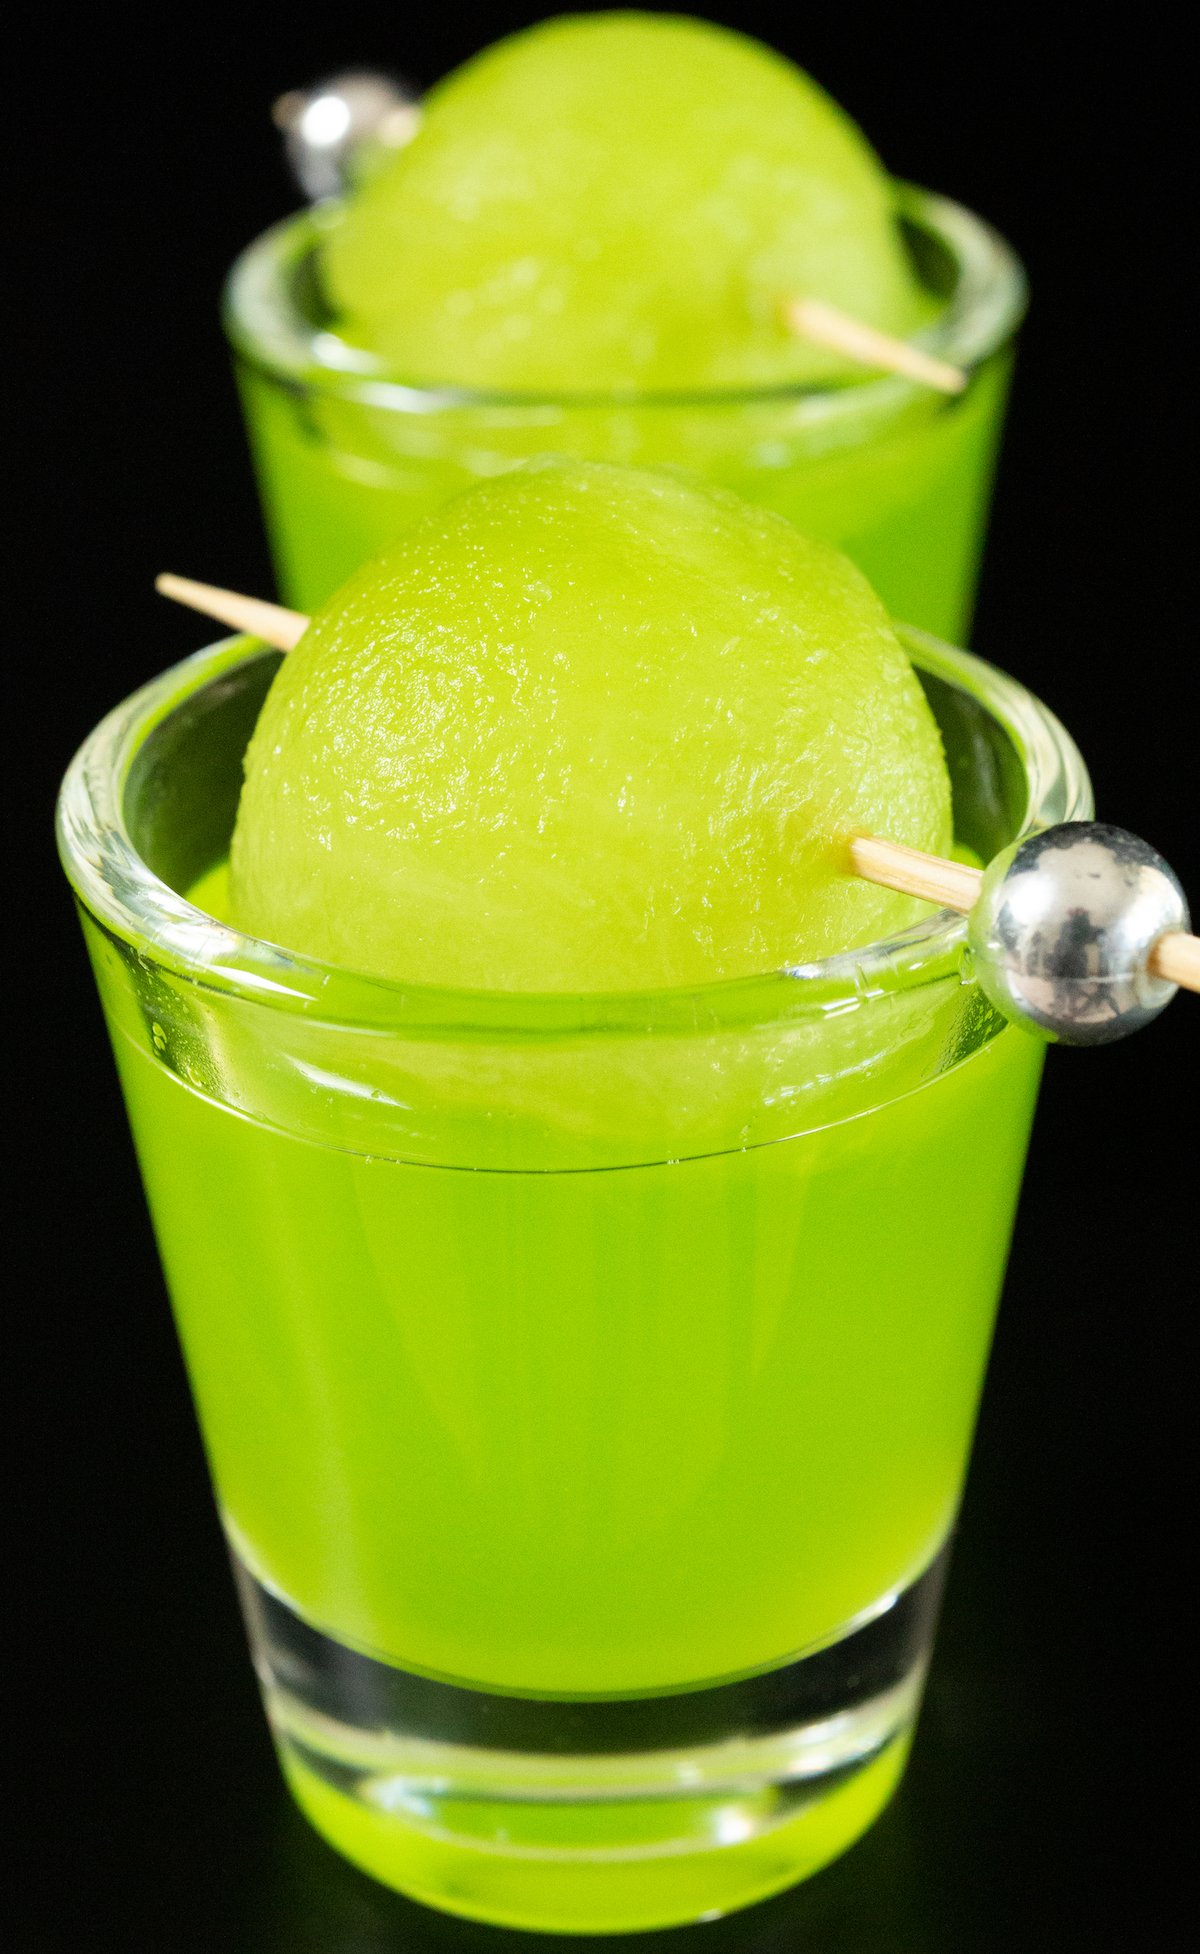 Two shot glasses filled with bright green melon ball shots on a black background.